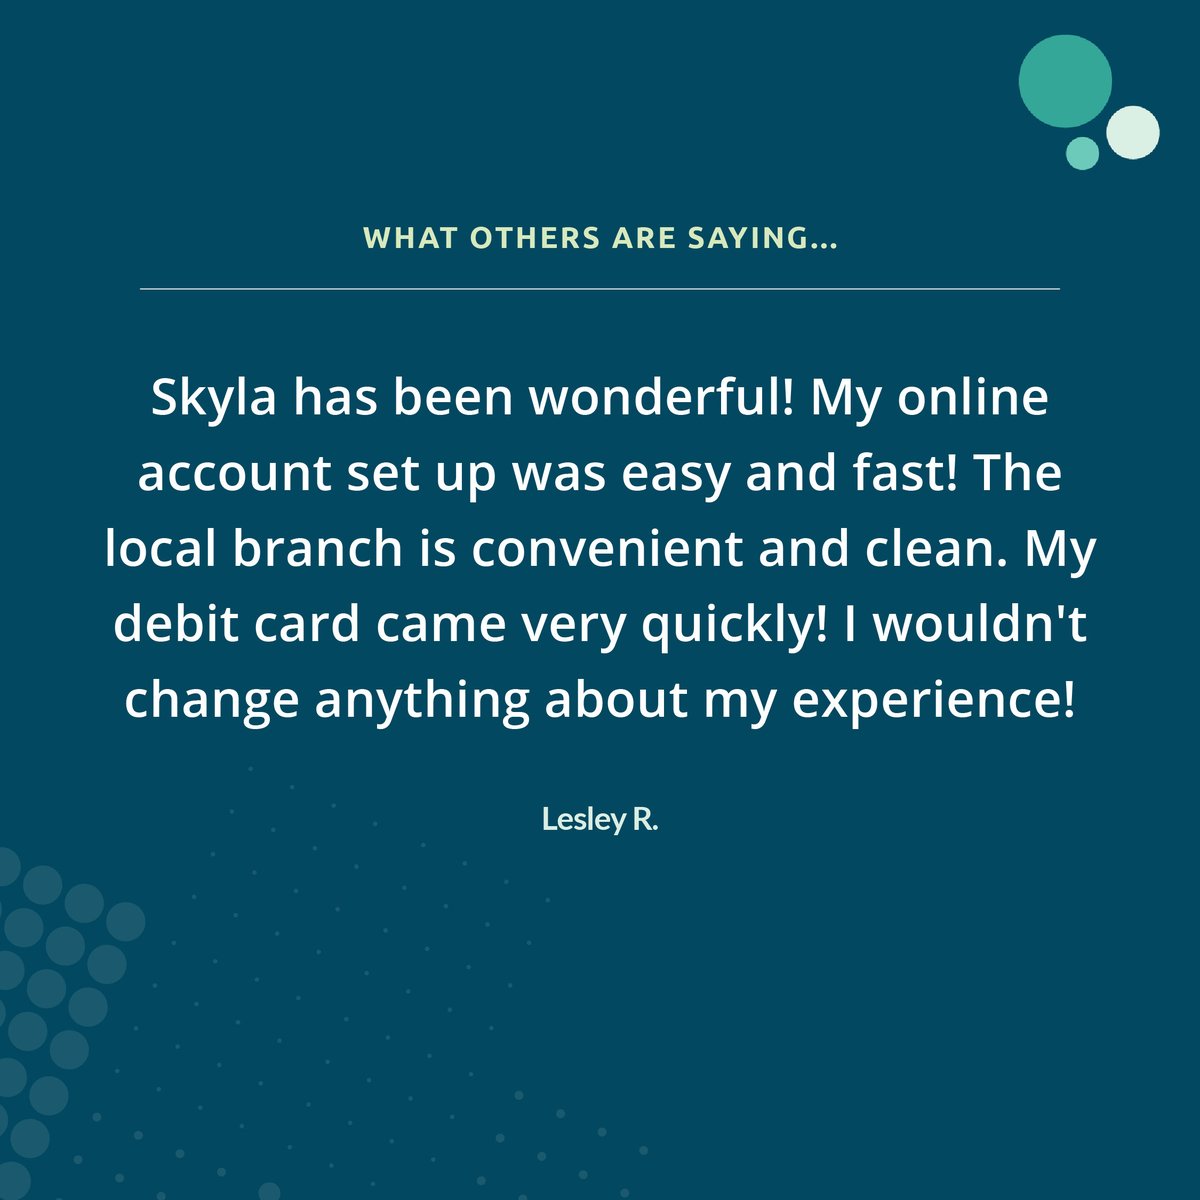 Look at these two wonderful testimonials about our Asheville branch! Shoutout to Allison and the Asheville team for a job well done!

#SkylaCU #BuildingAmazing #BelieveInBetter #TuesdayTestimonial #Banking #MemberExperience